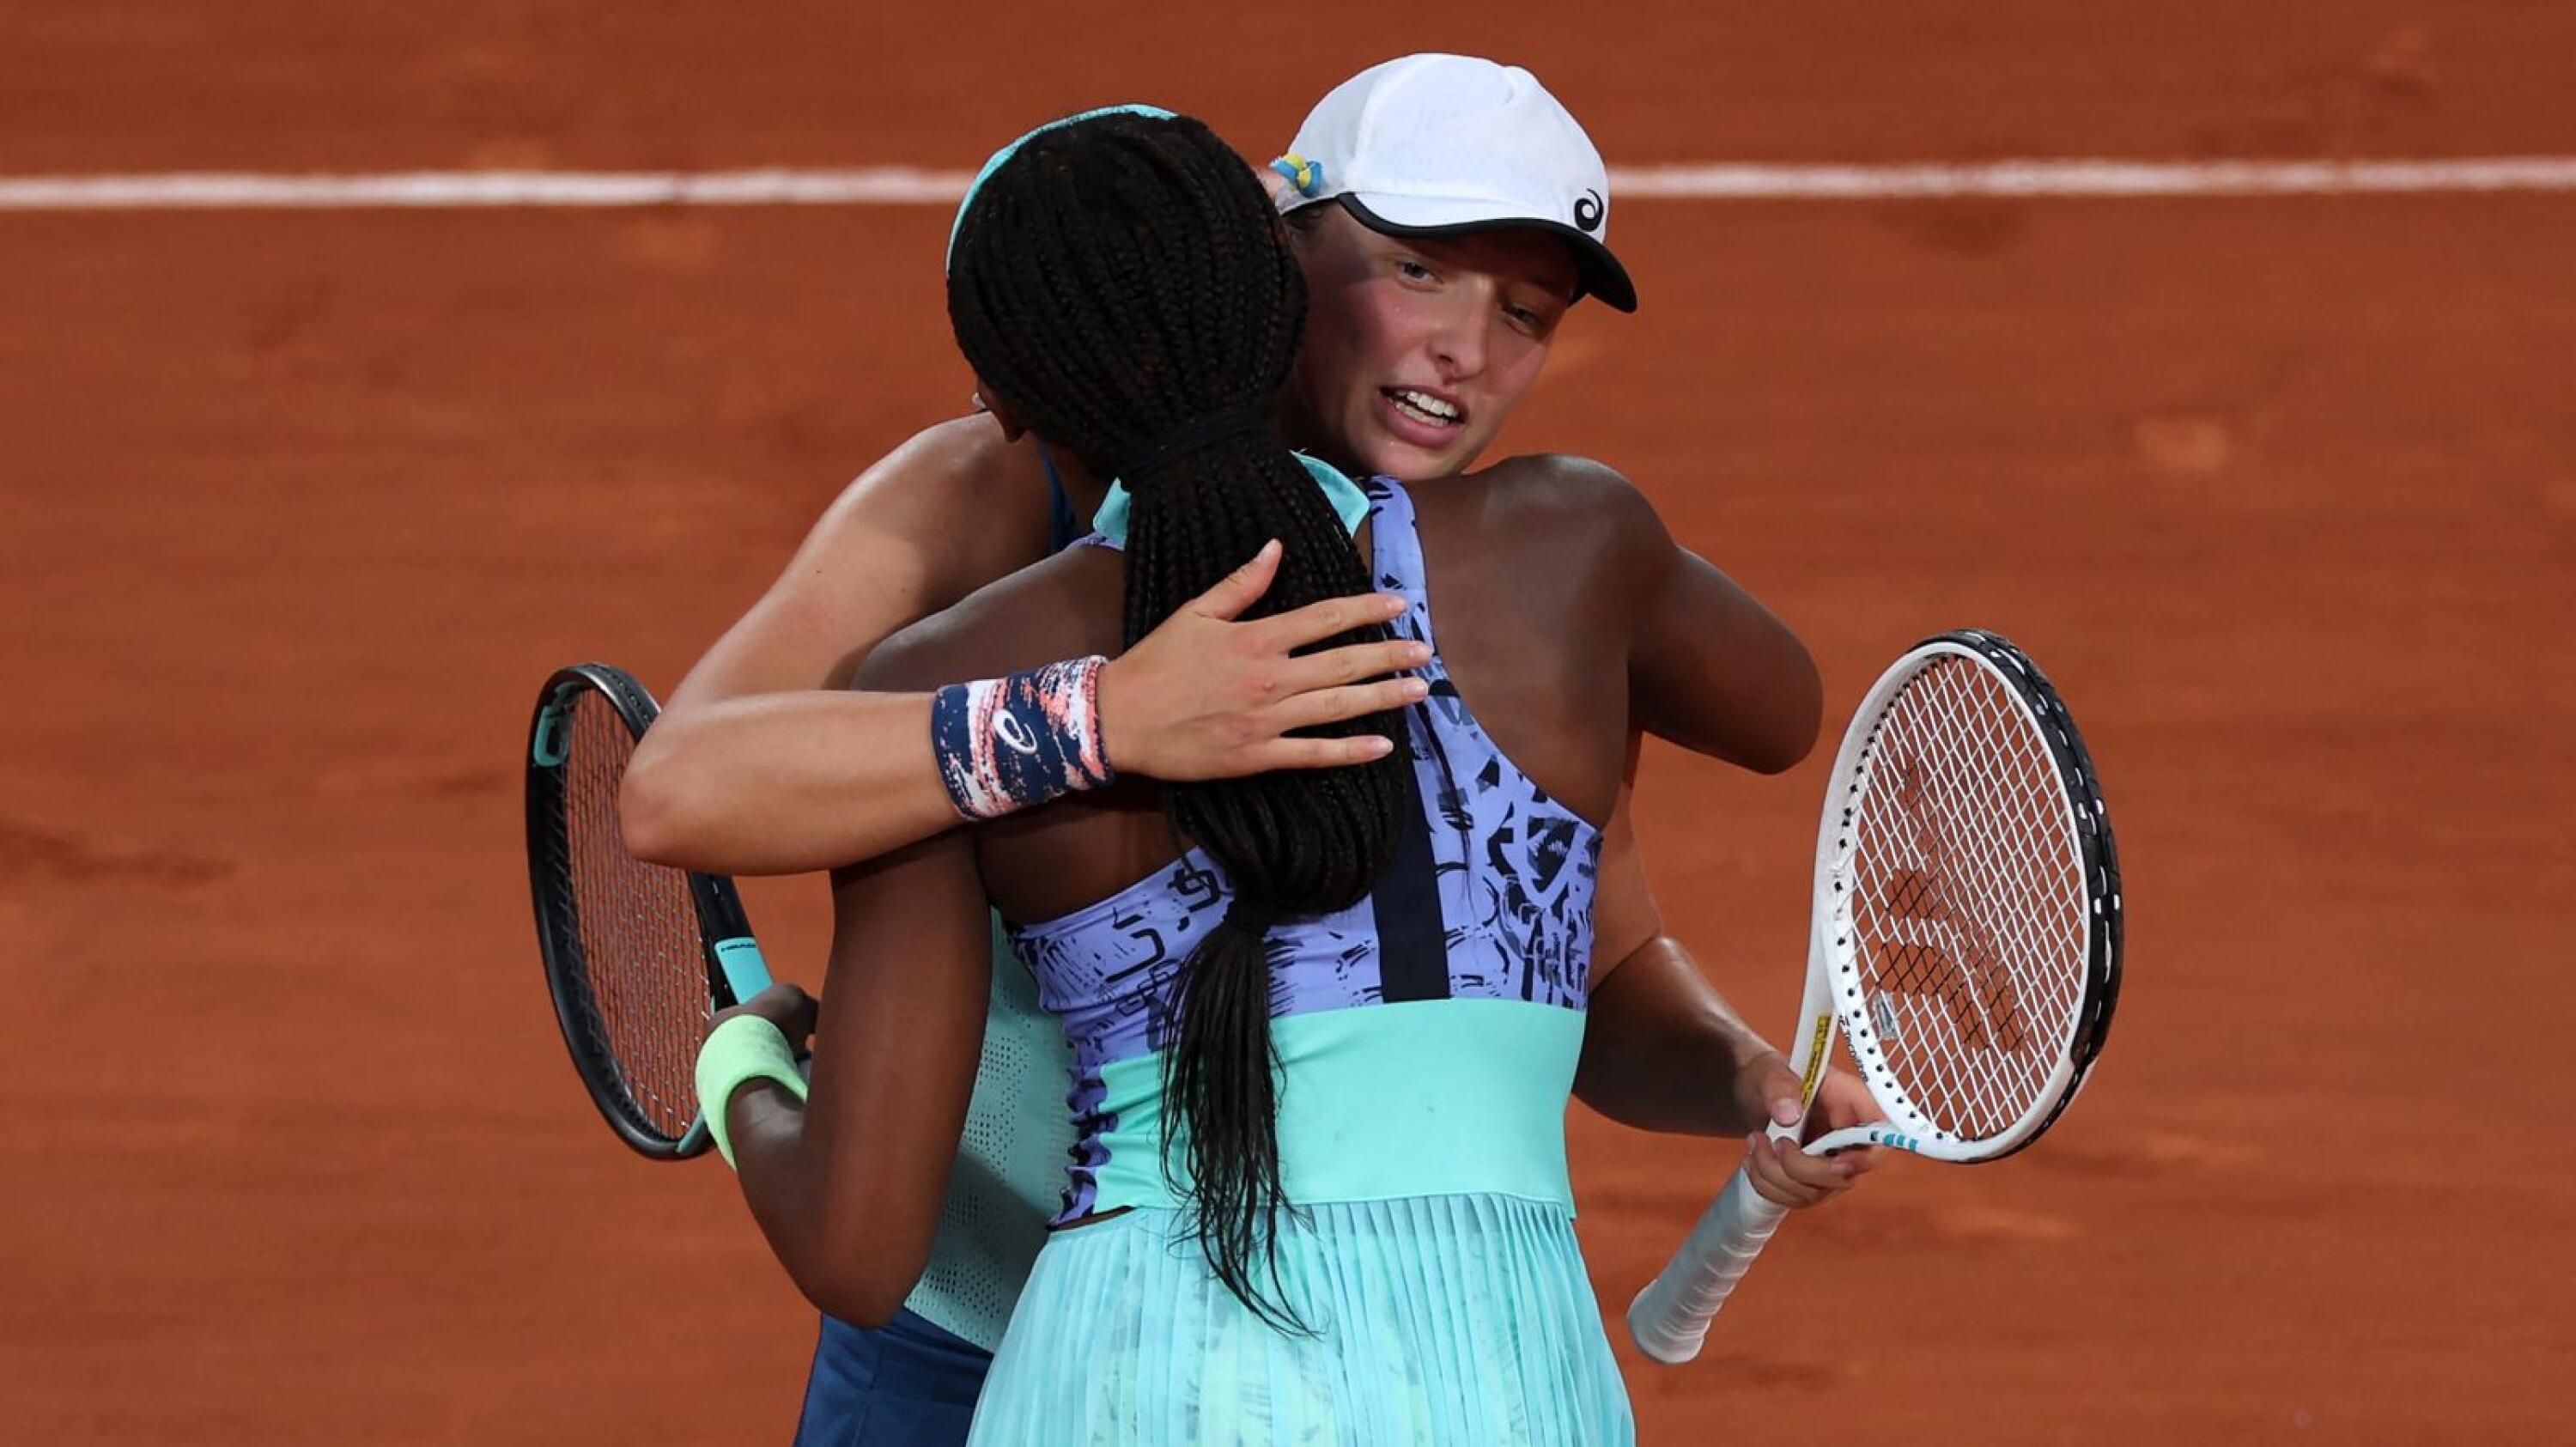 Poland's Iga Swiatek hugs US' Coco Gauff after winning their women's single final match on day fourteen of the Roland-Garros Open tennis tournament at the Court Philippe-Chatrier in Paris on Saturday. Swiatek cruised to her second French Open title by dominating Gauff in the final as the world number one claimed her 35th successive victory